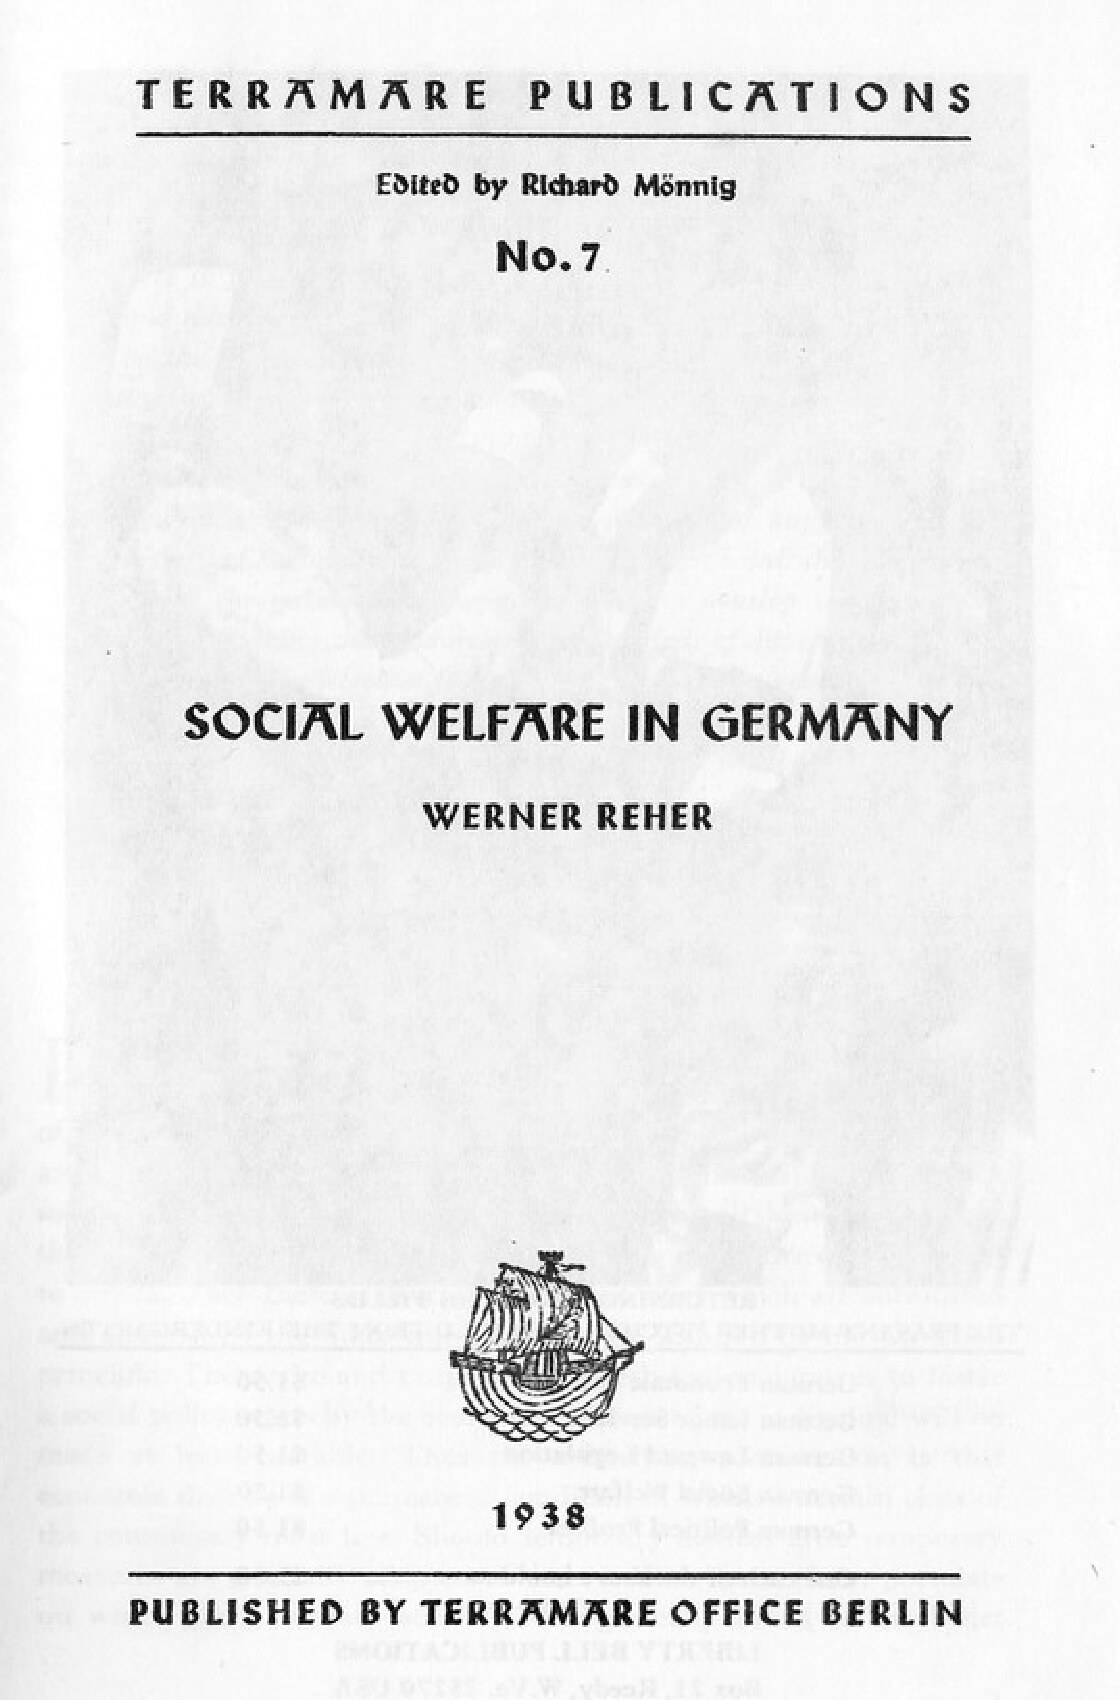 Reher, Werner; Social Welfare in Germany